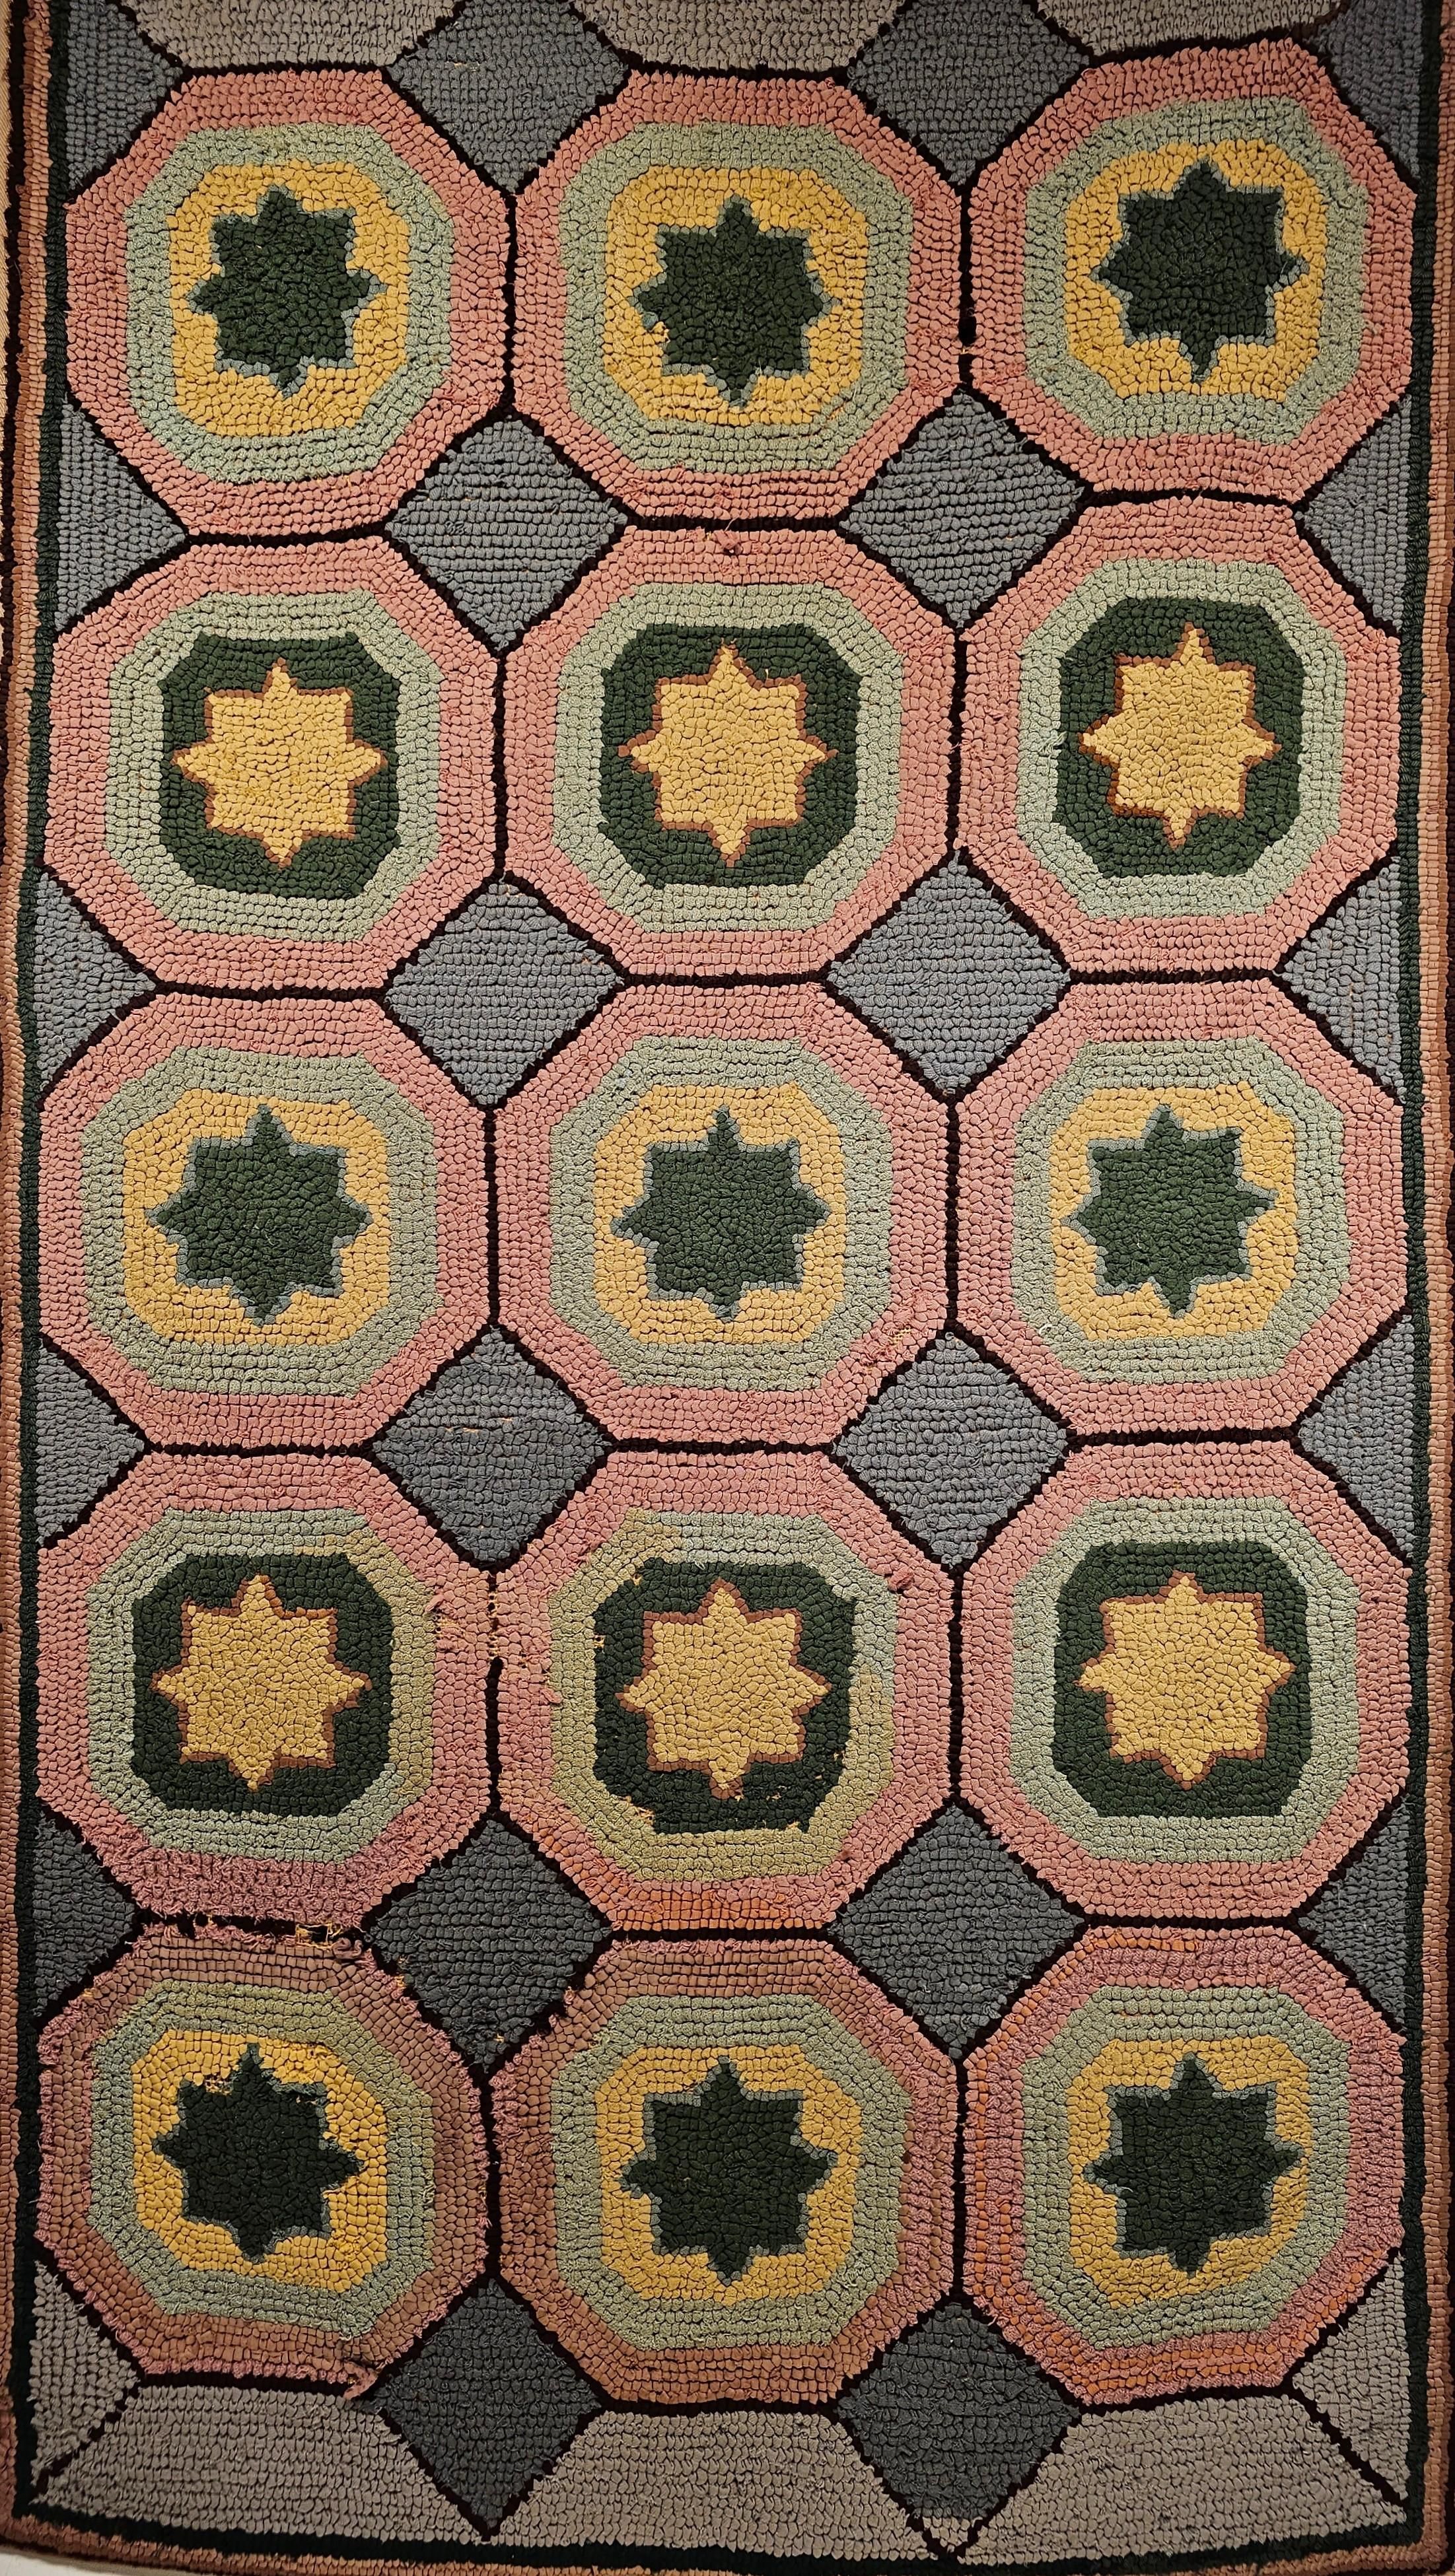 An American Hand Hooked Rug from the early 1900s in a geometric pattern with pastel colors in gray, blue, pink, and yellow.  The use of special design and the brilliant colors makes this truly an artistic piece wonderful to be used as a wall